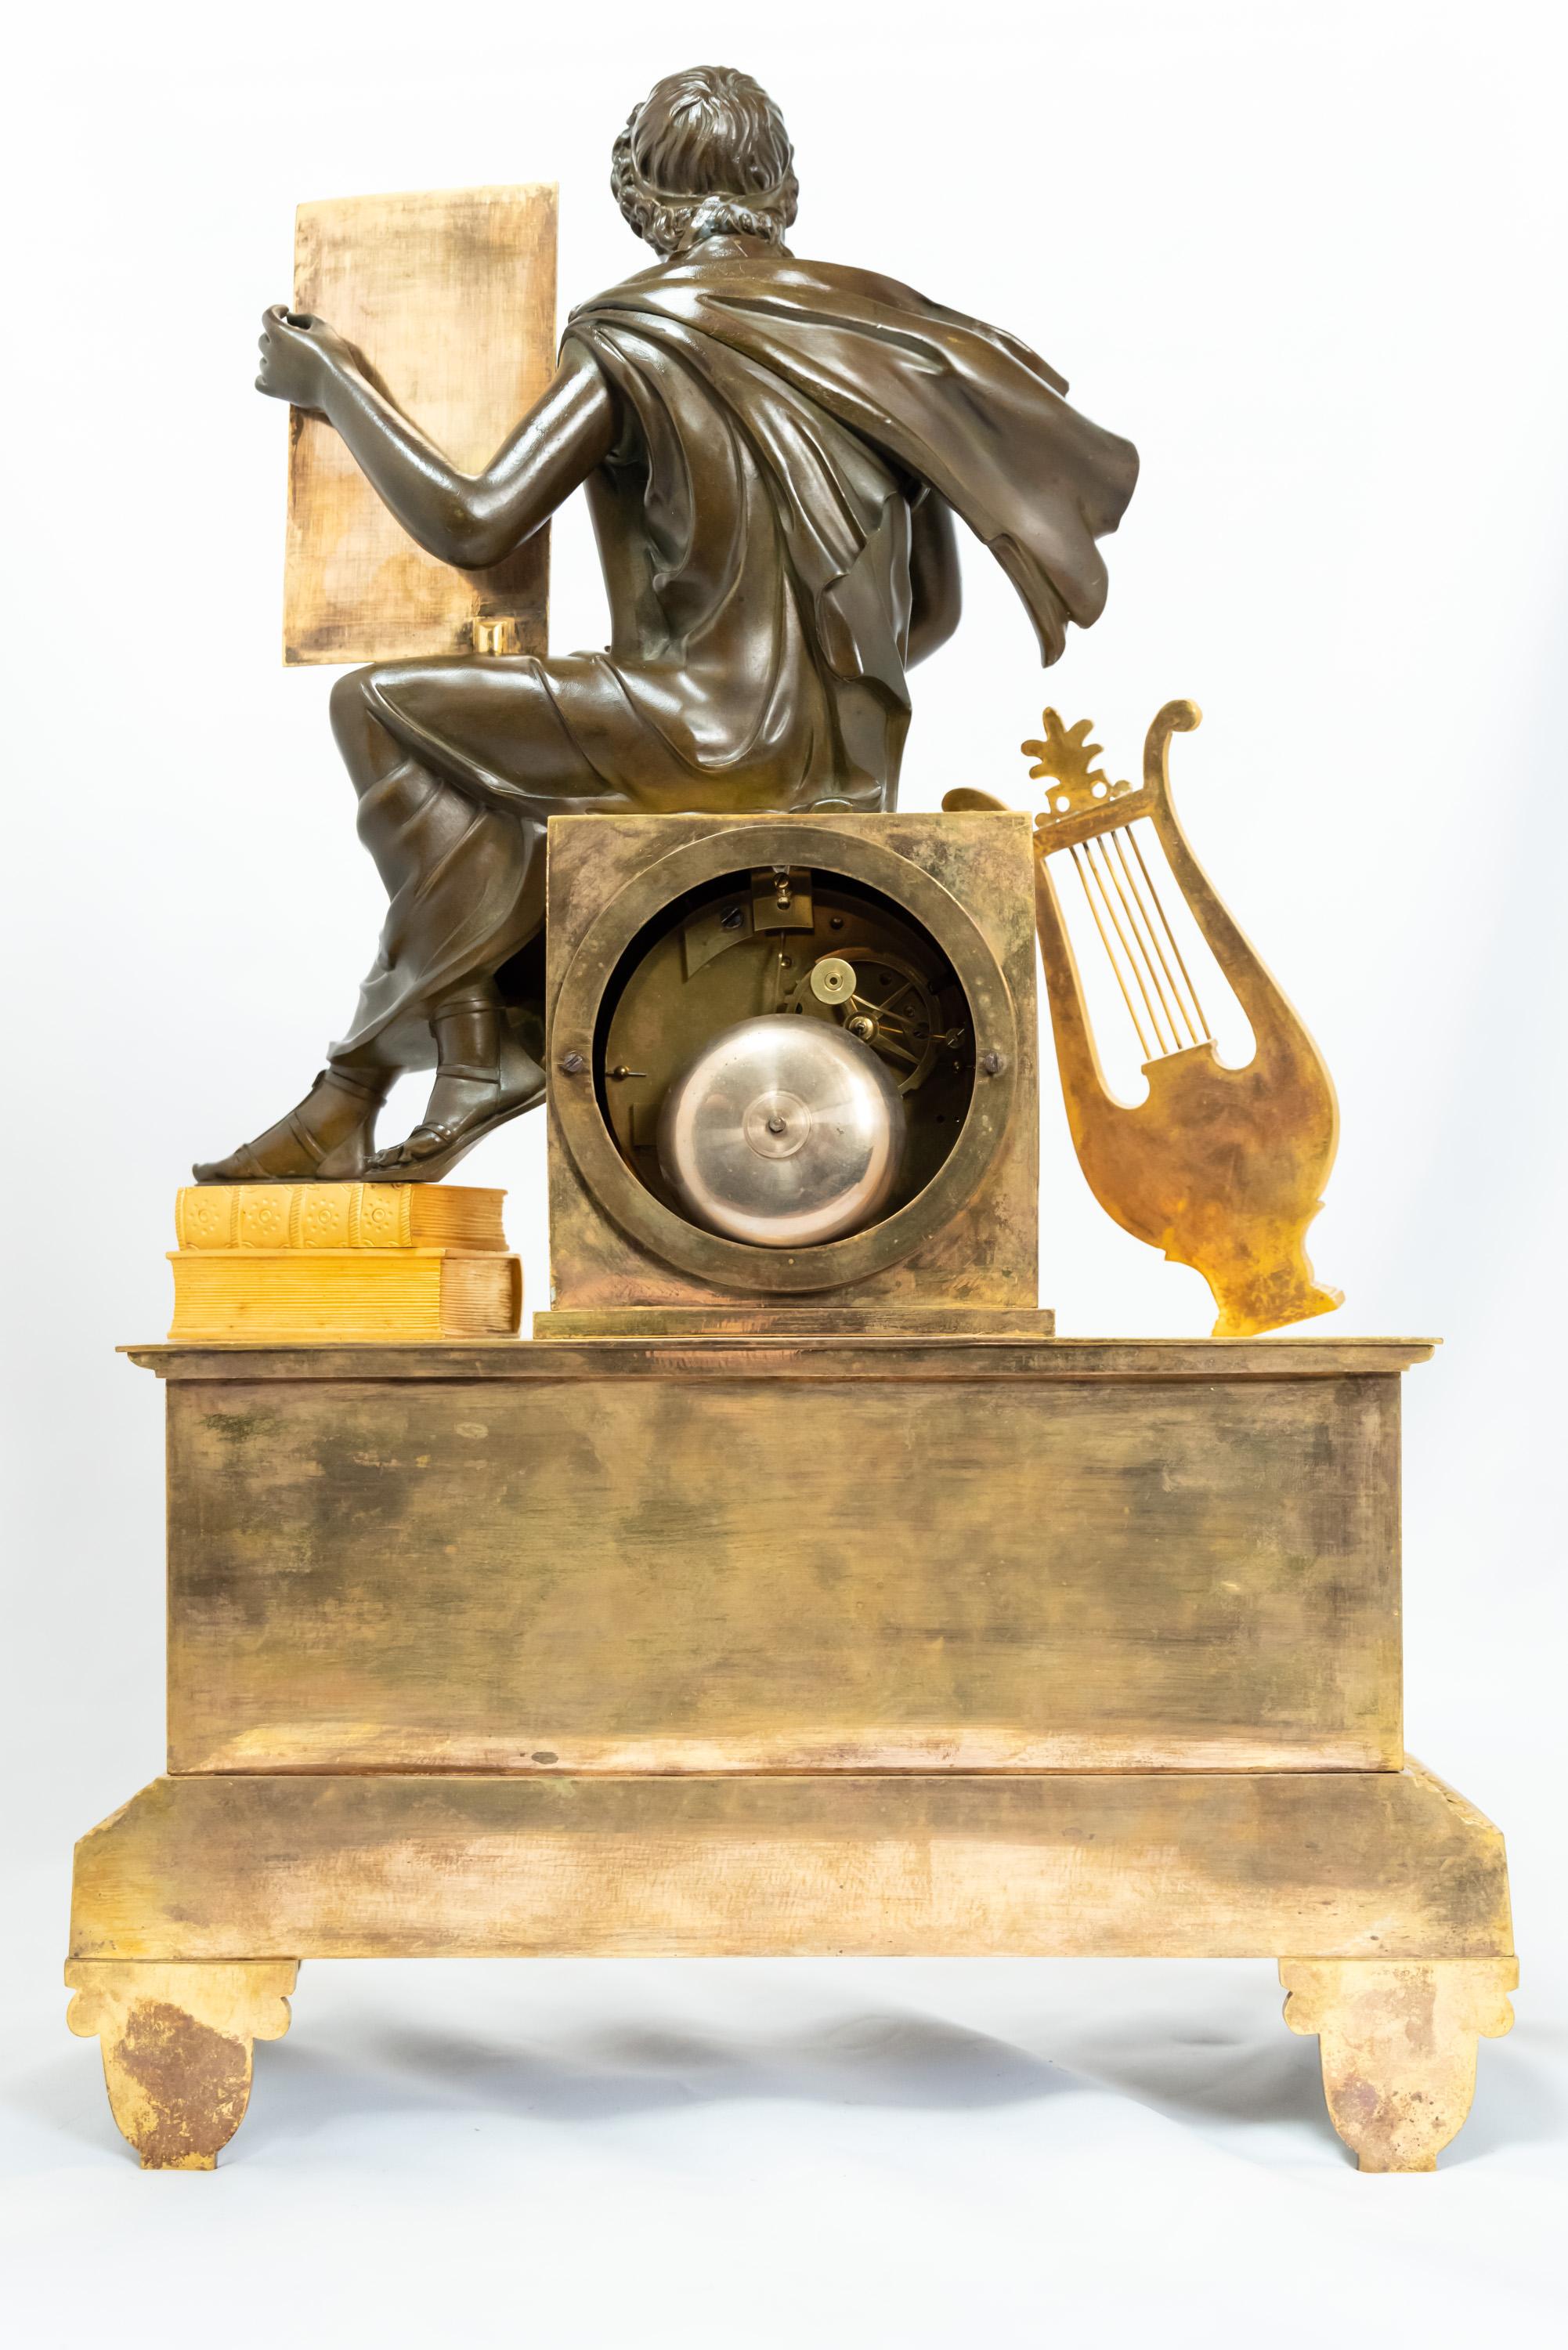 French A Restauration Patina and Fire-Gilt Clock Depicting Virgil For Sale